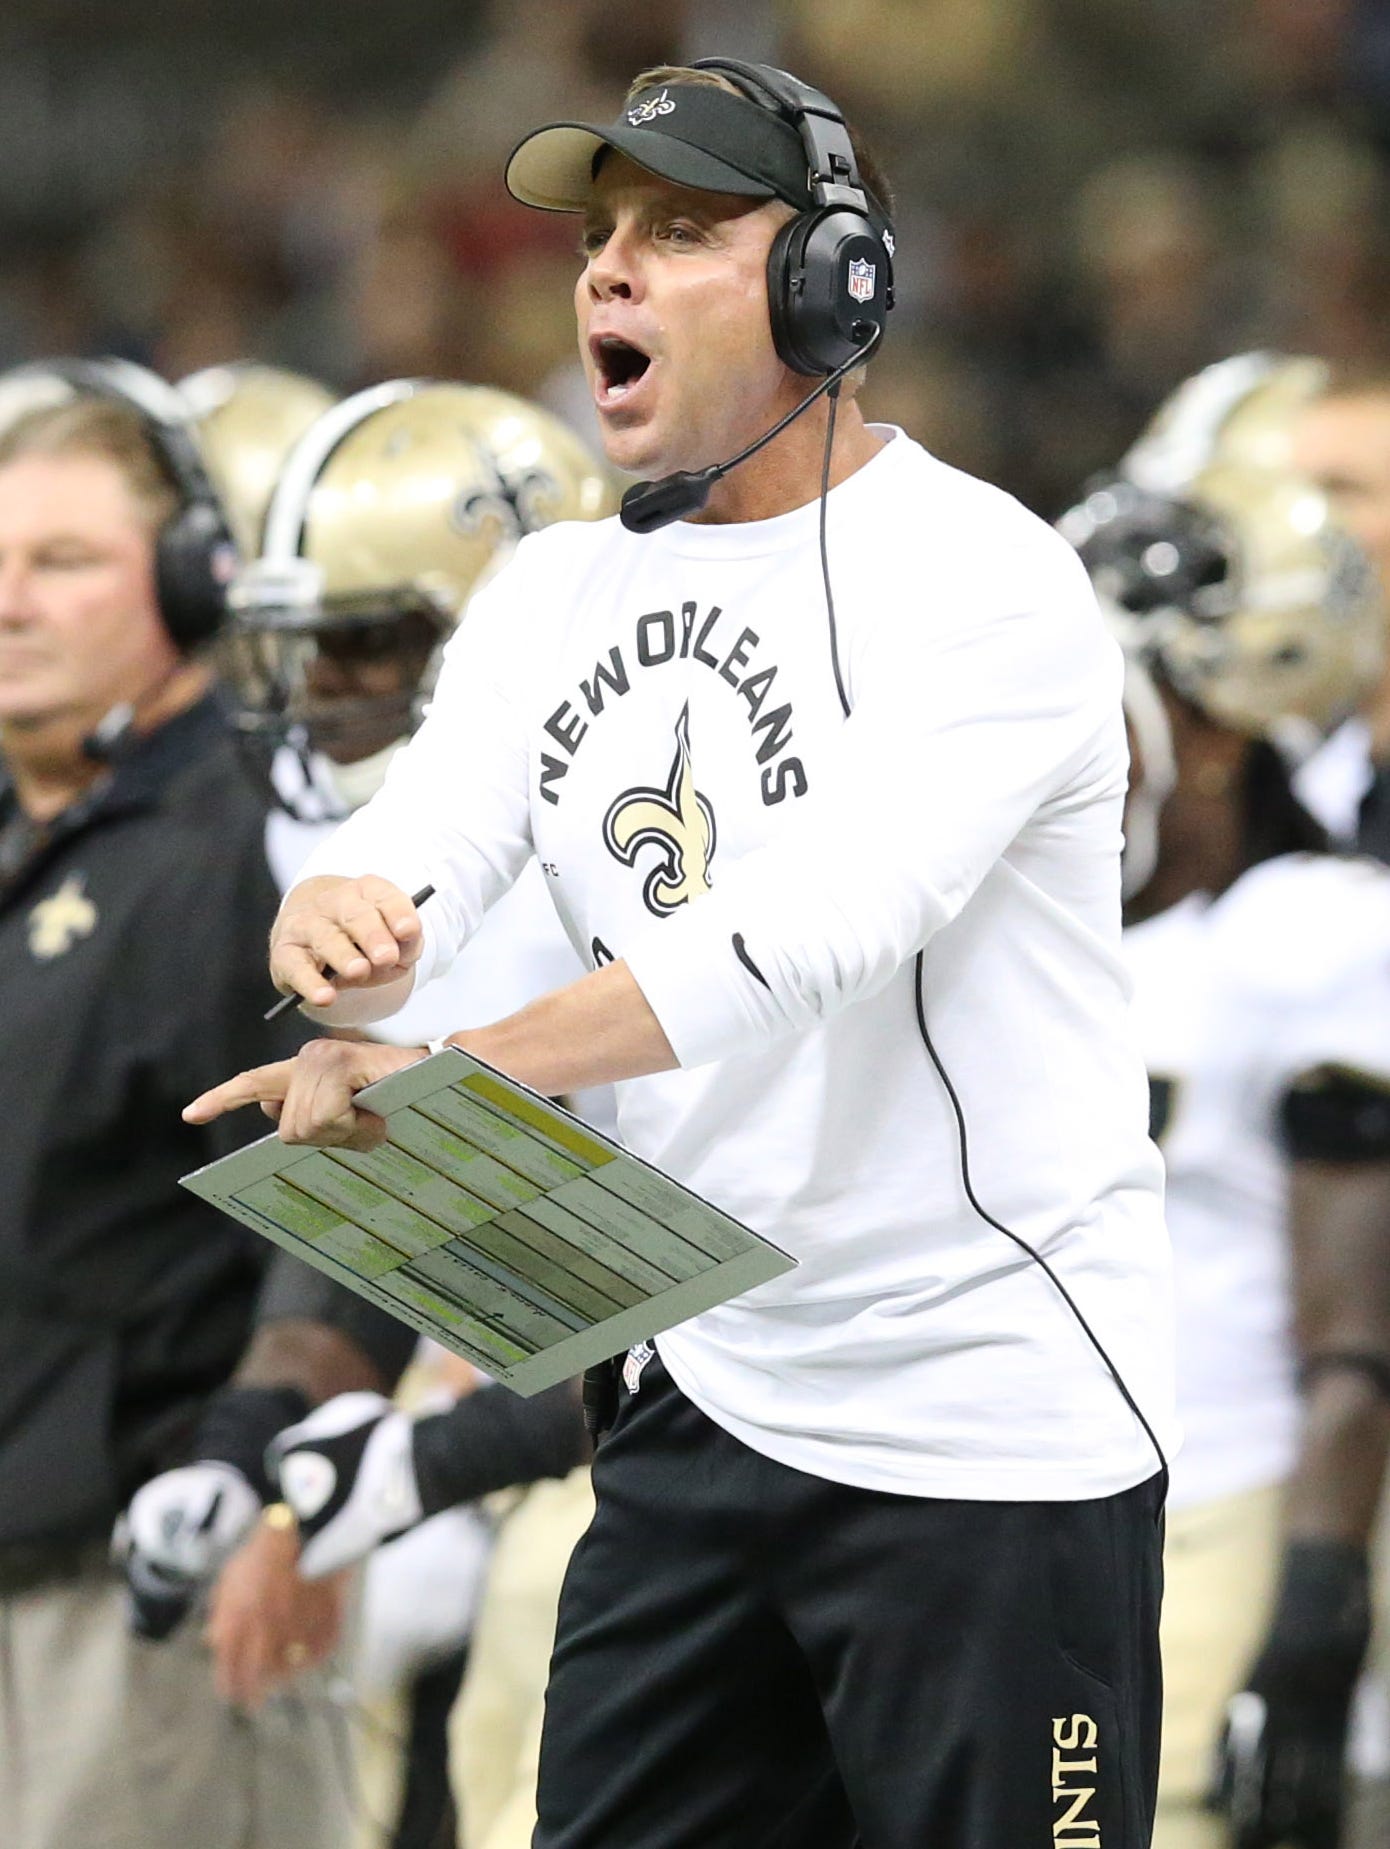 Sean Payton marches on with new outlook